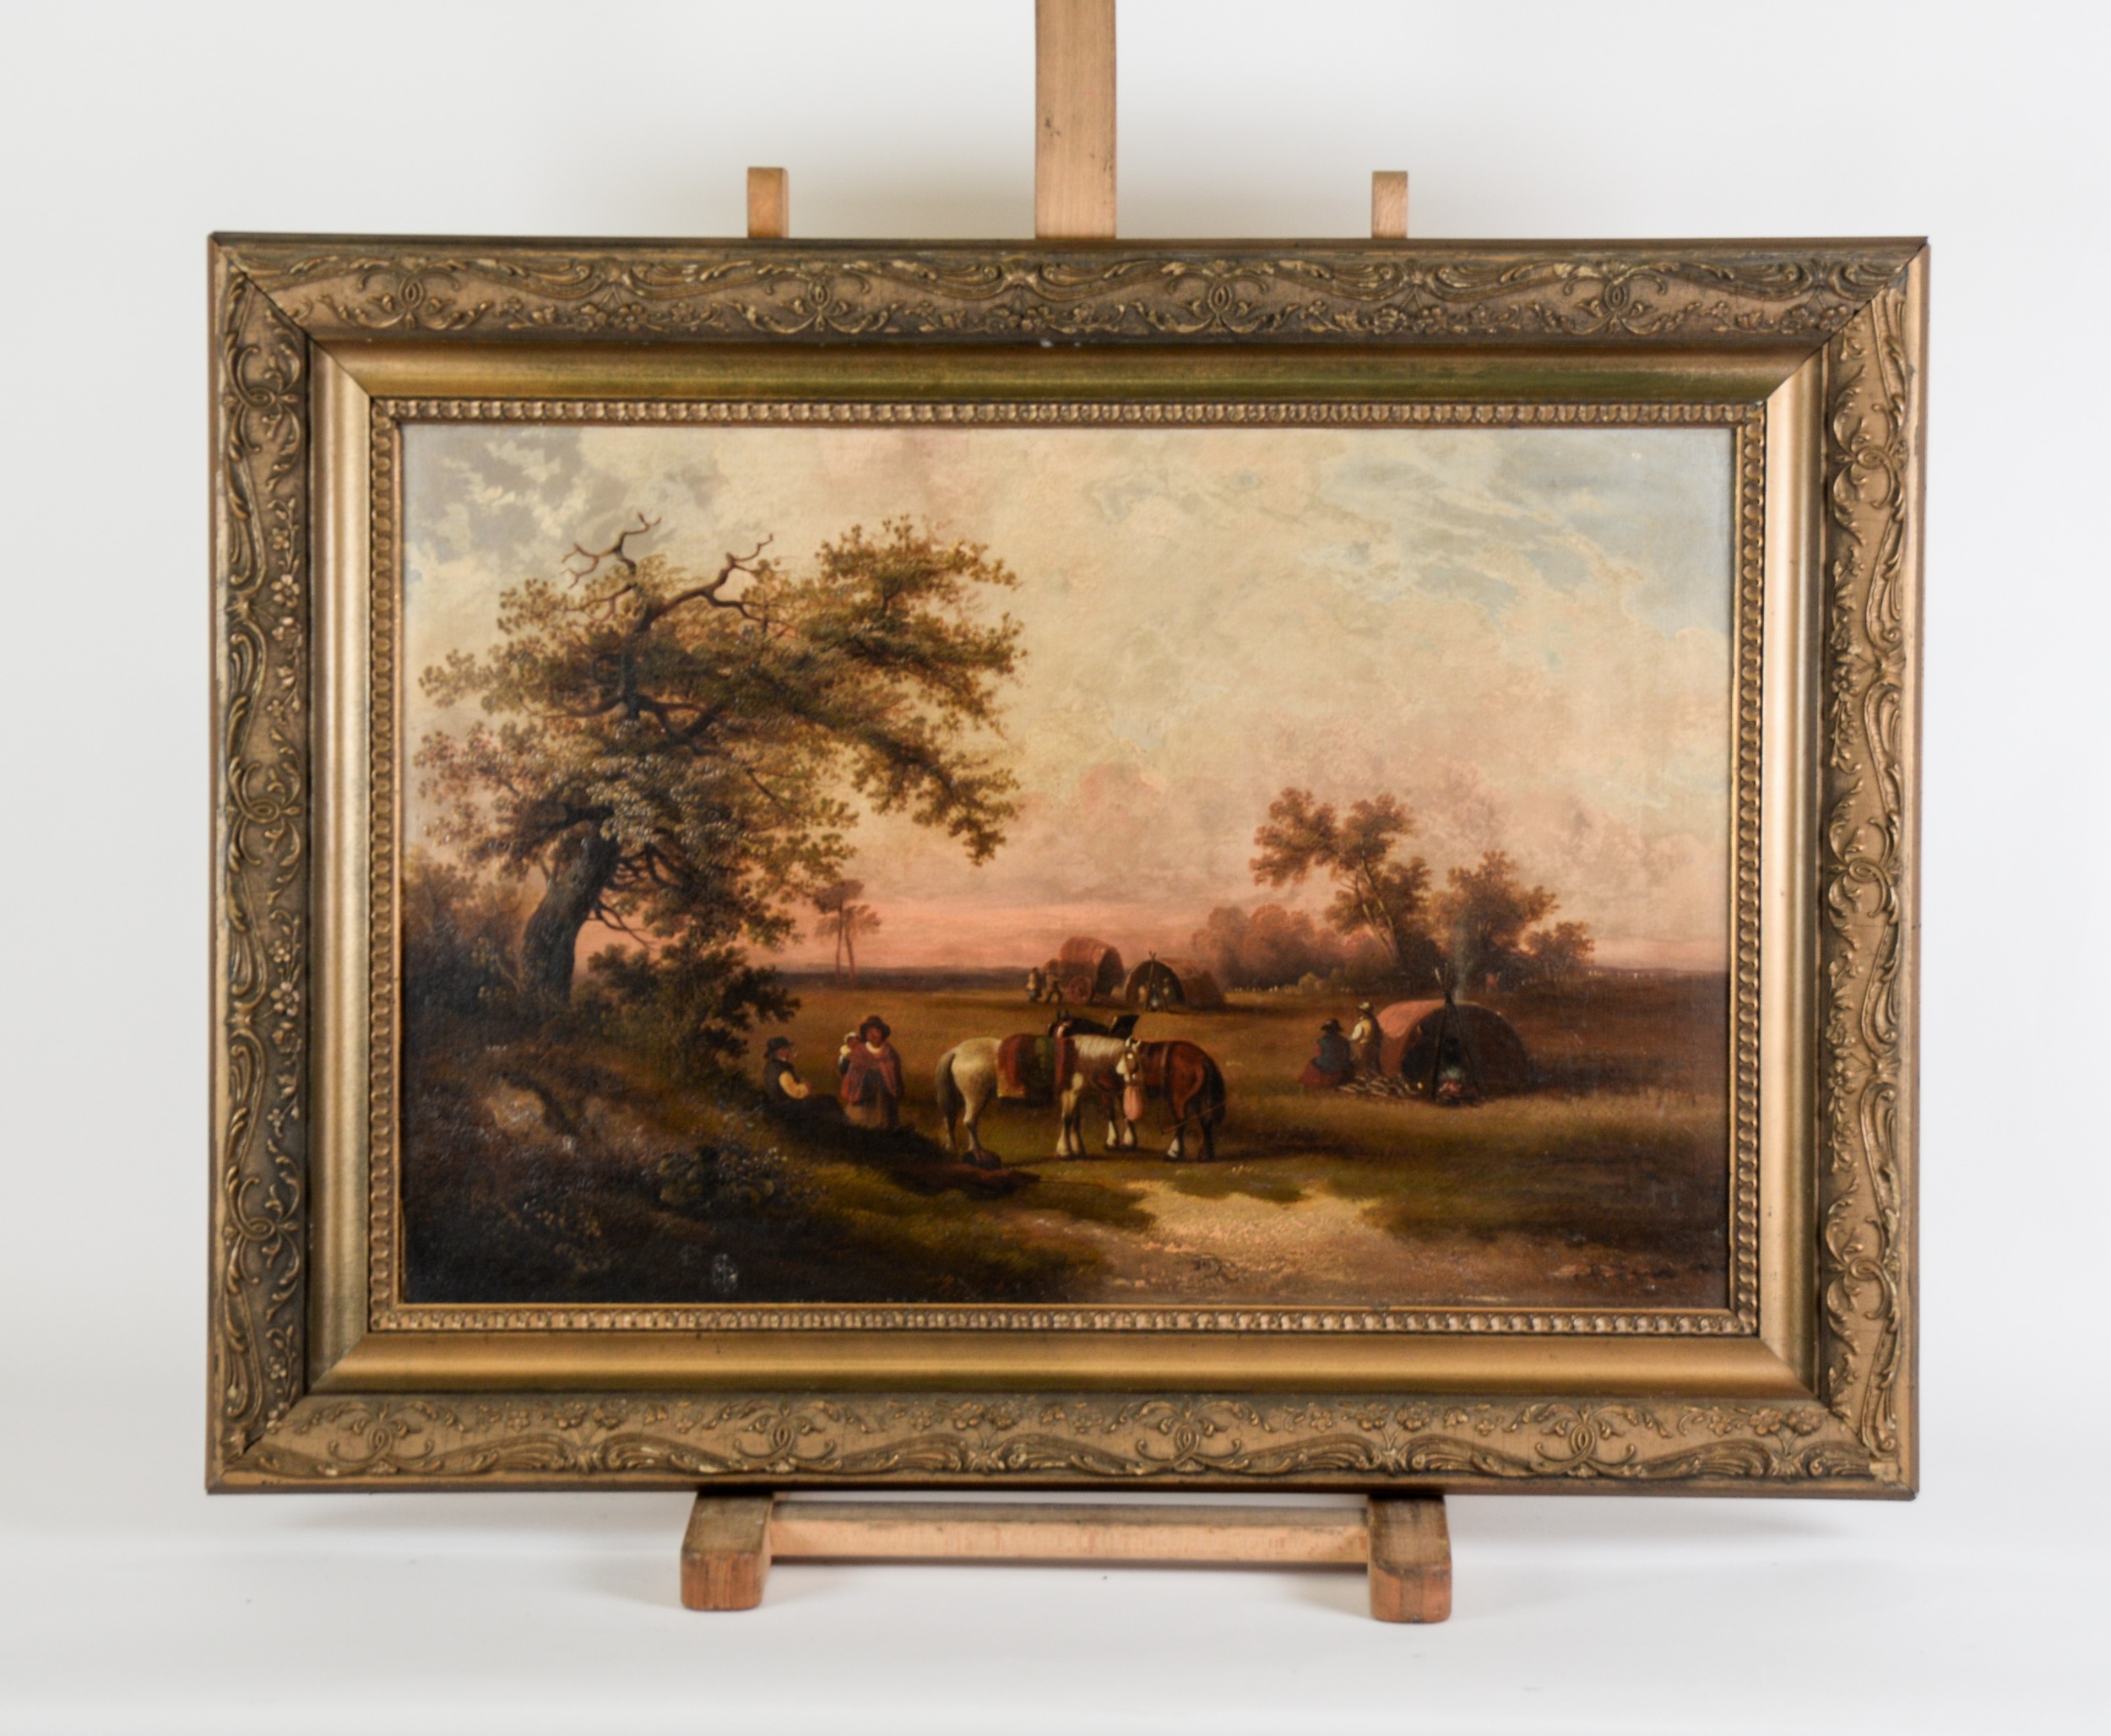 ATTRIBUTED TO EDWARD ROBERT SMYTHE (1810-1899) OIL ON RELINED CANVAS Gypsy Encampment, Autumnal - Image 2 of 2